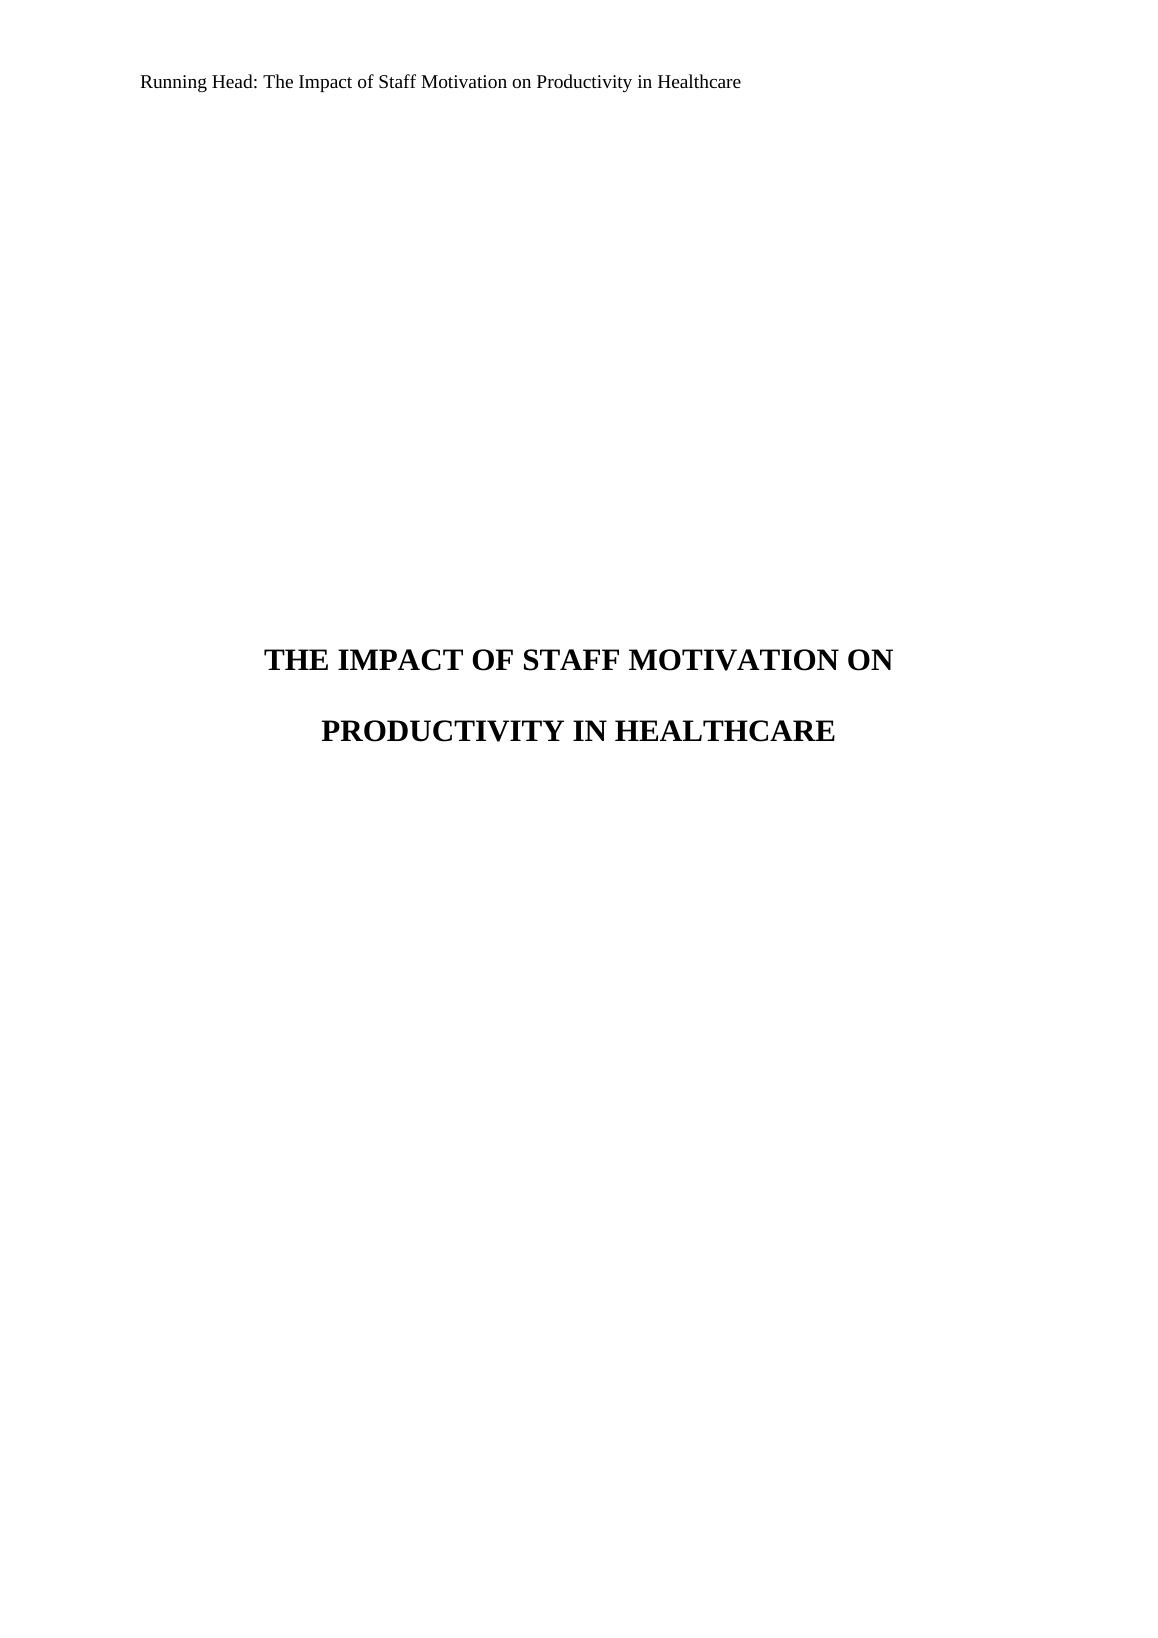 The Impact of Staff Motivation on Productivity in Healthcare_1